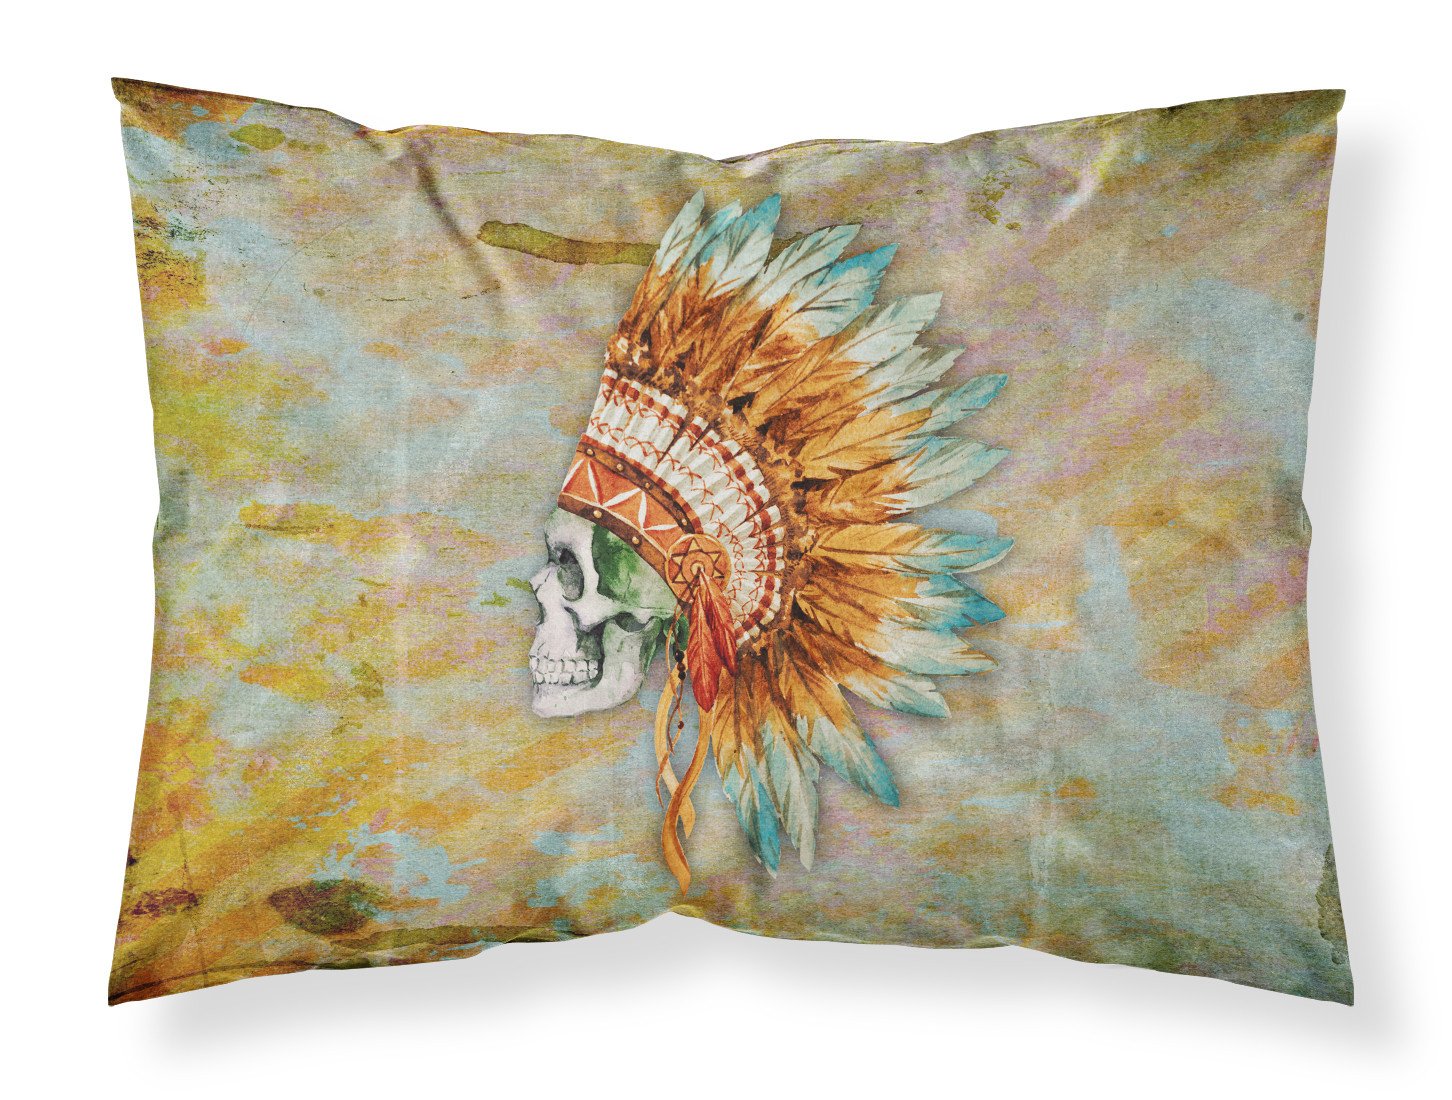 Day of the Dead Indian Skull  Fabric Standard Pillowcase BB5127PILLOWCASE by Caroline's Treasures